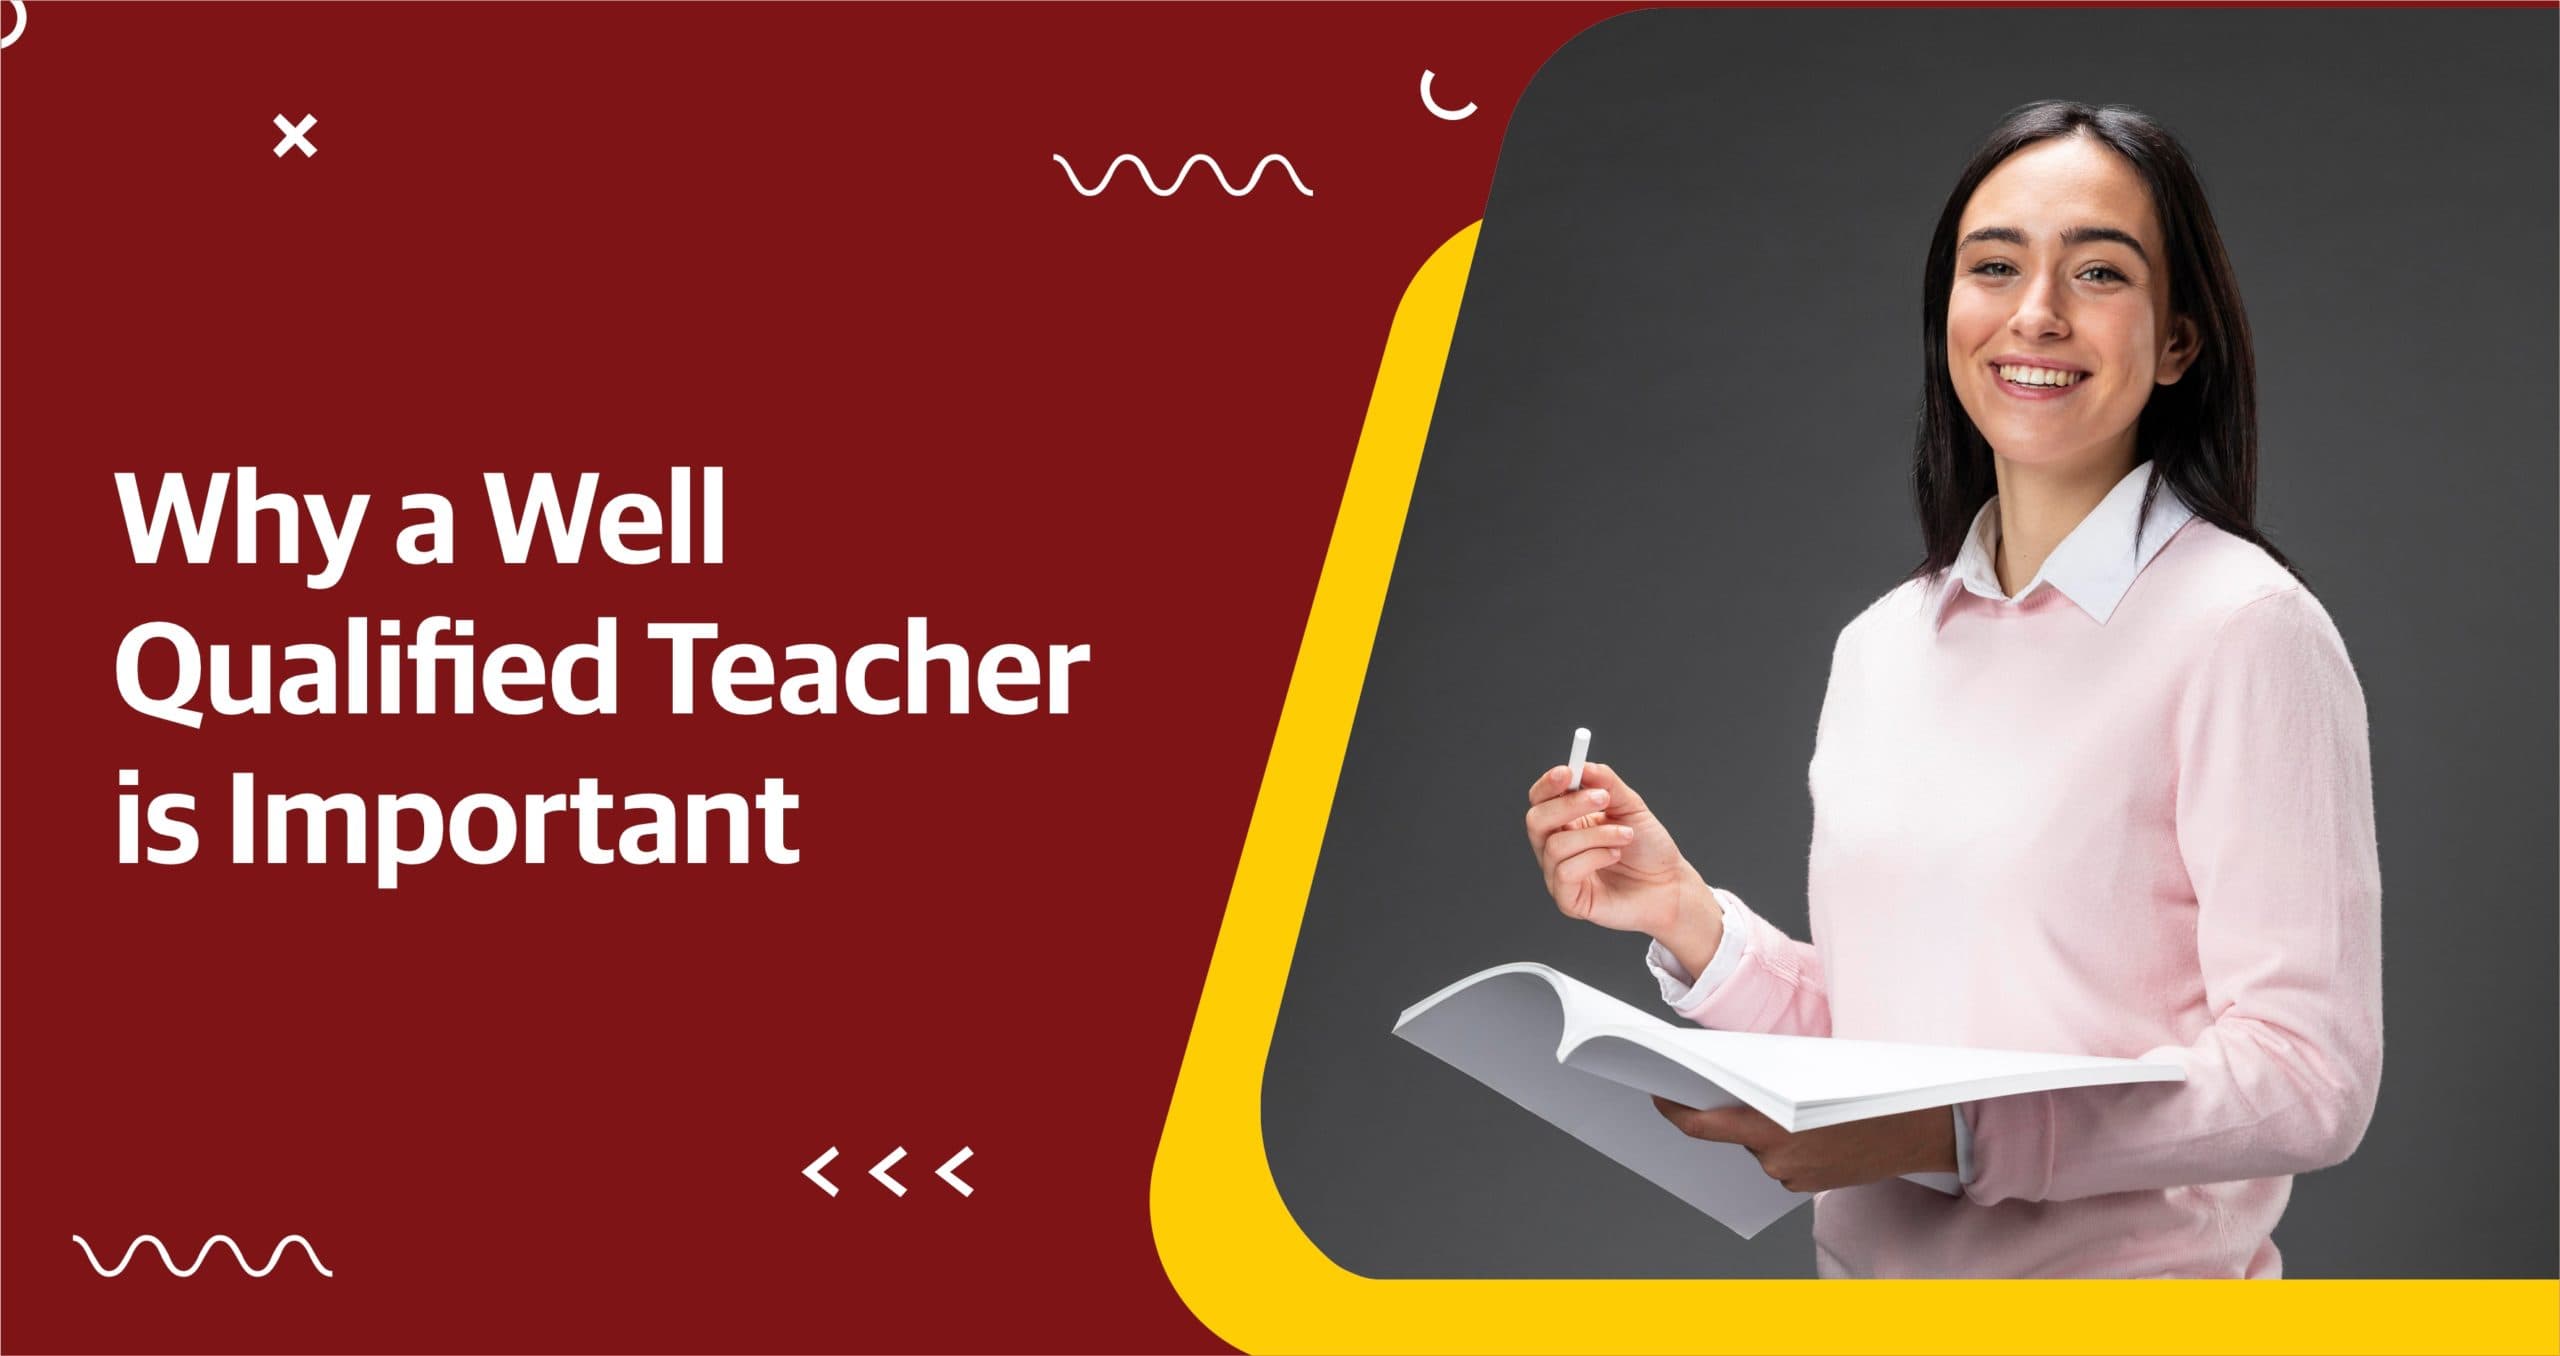 Why a Well Qualified Teacher is Important